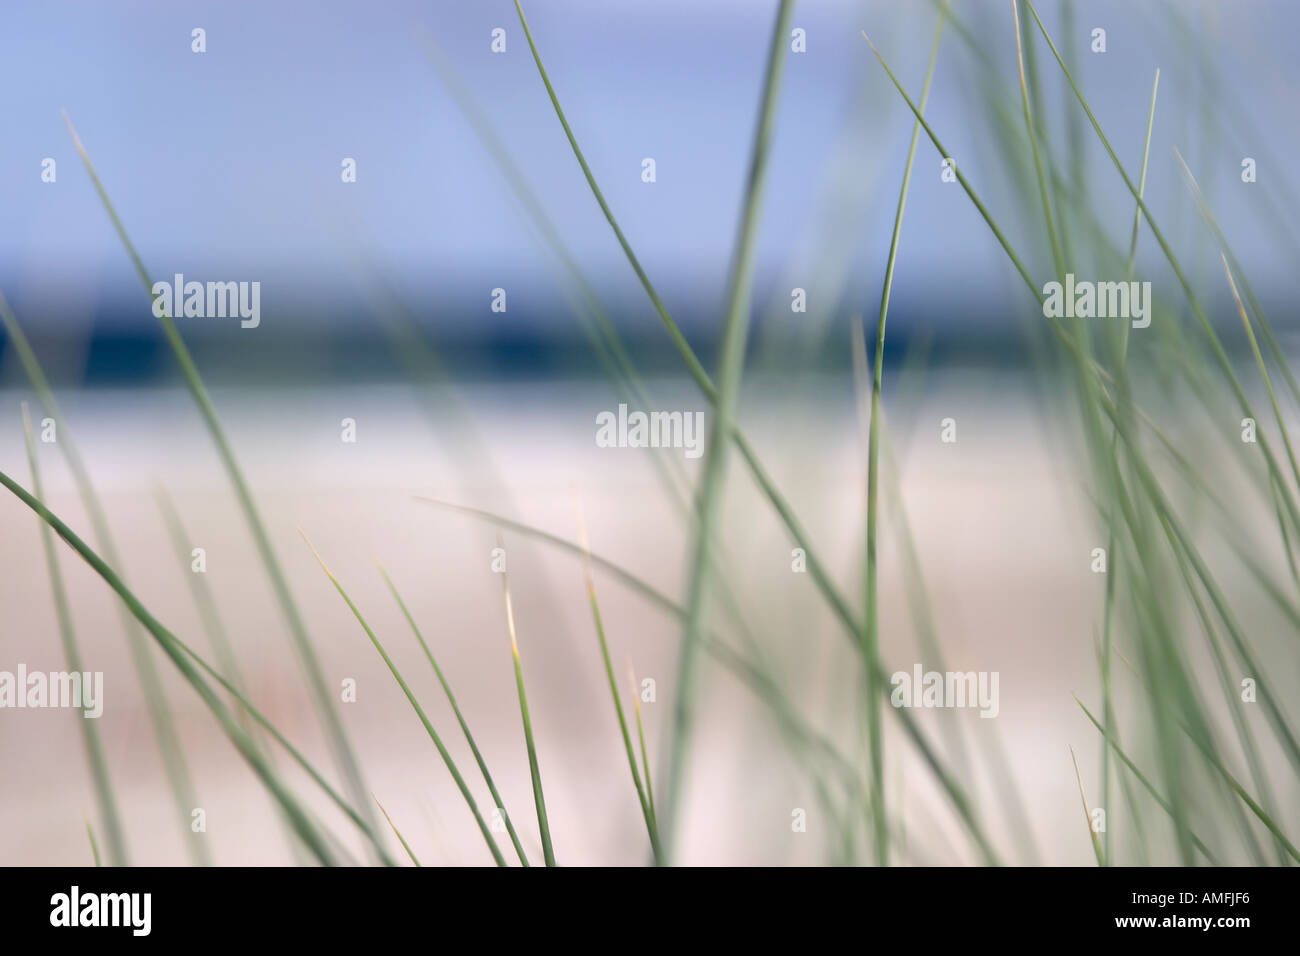 landscape shot showing close up detail of beach grass with sand sea and sky out of focus in the background Stock Photo